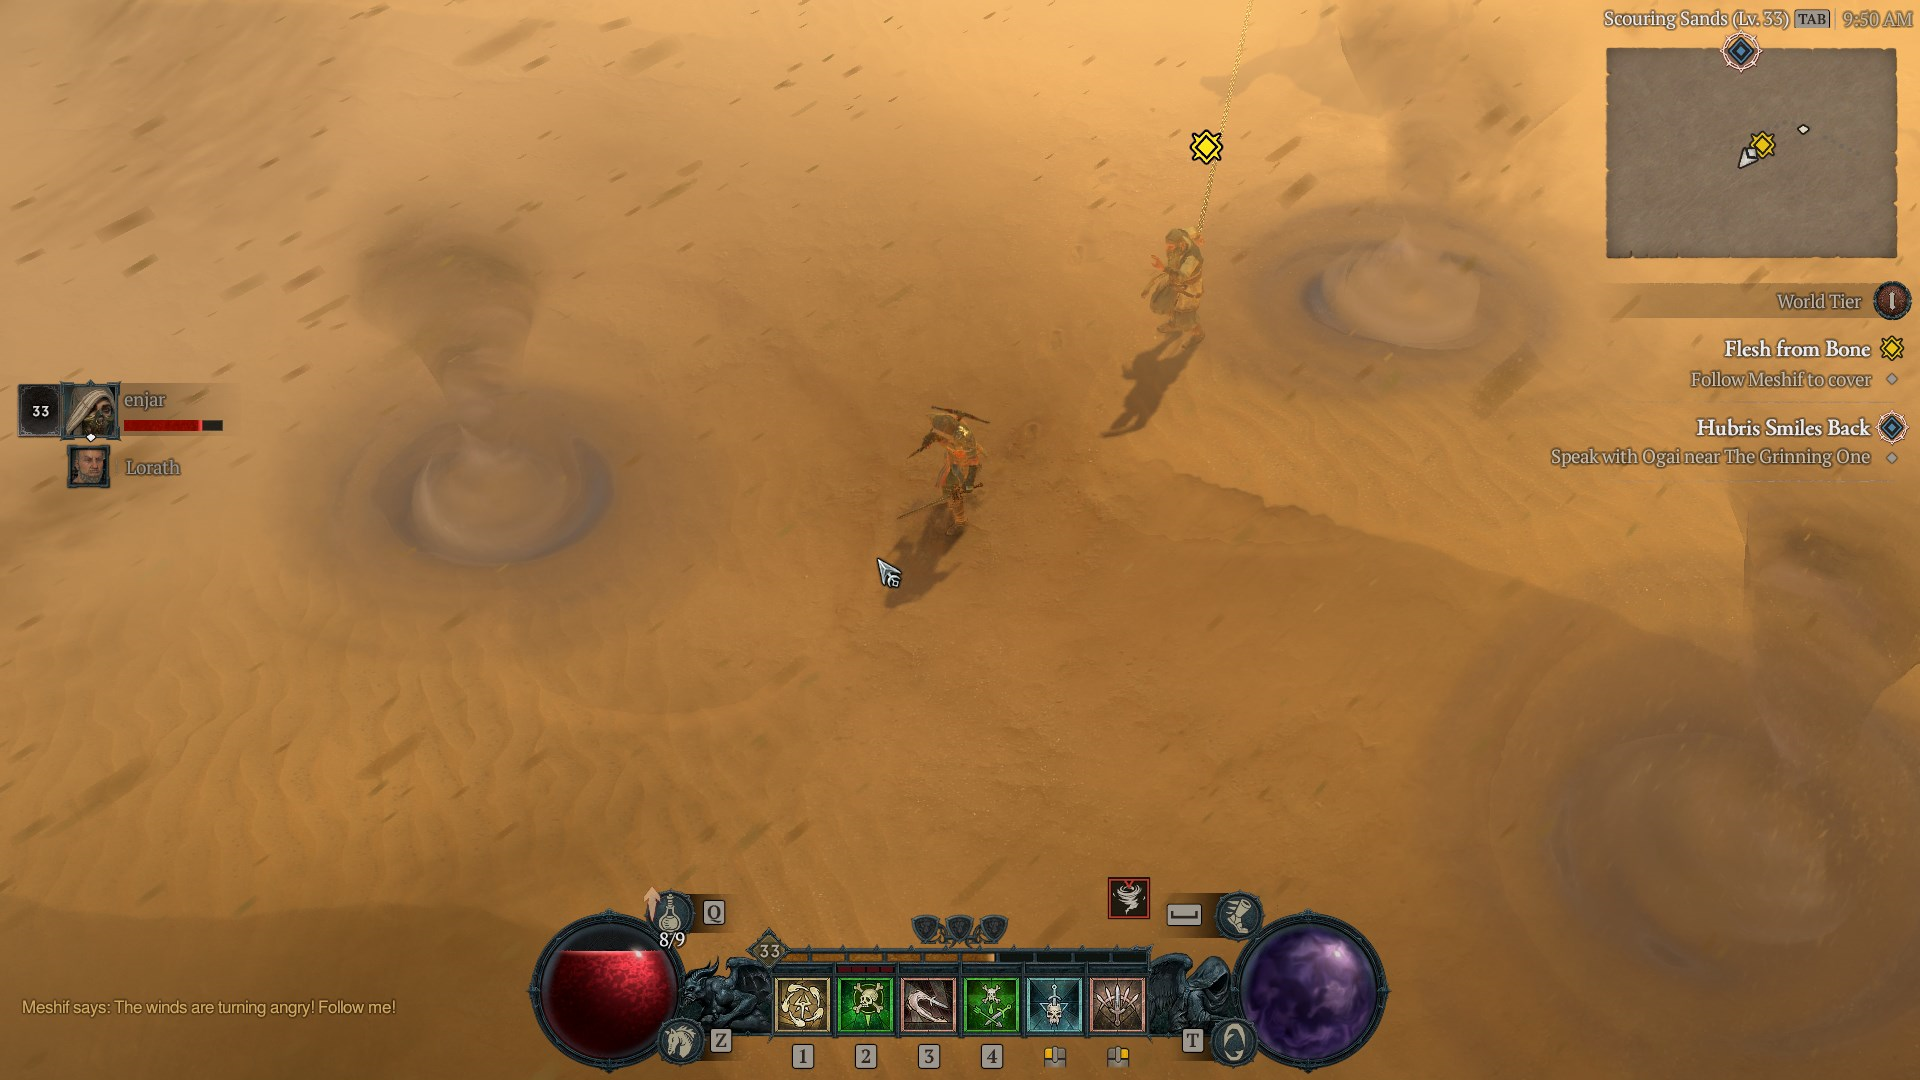 walking though the desert.png